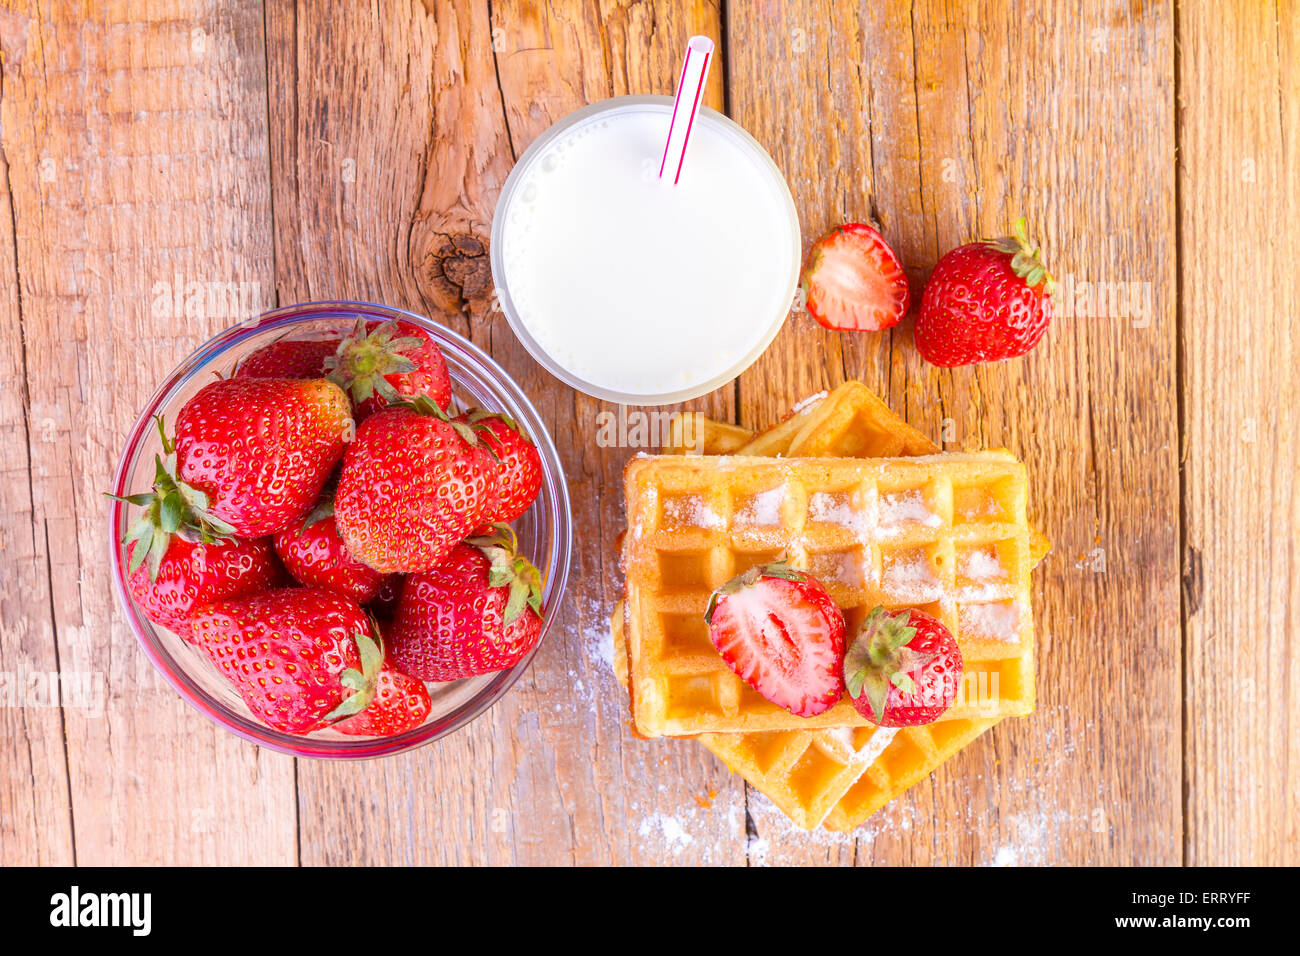 homemade waffles with strawberries and glass with milk on wooden background Stock Photo